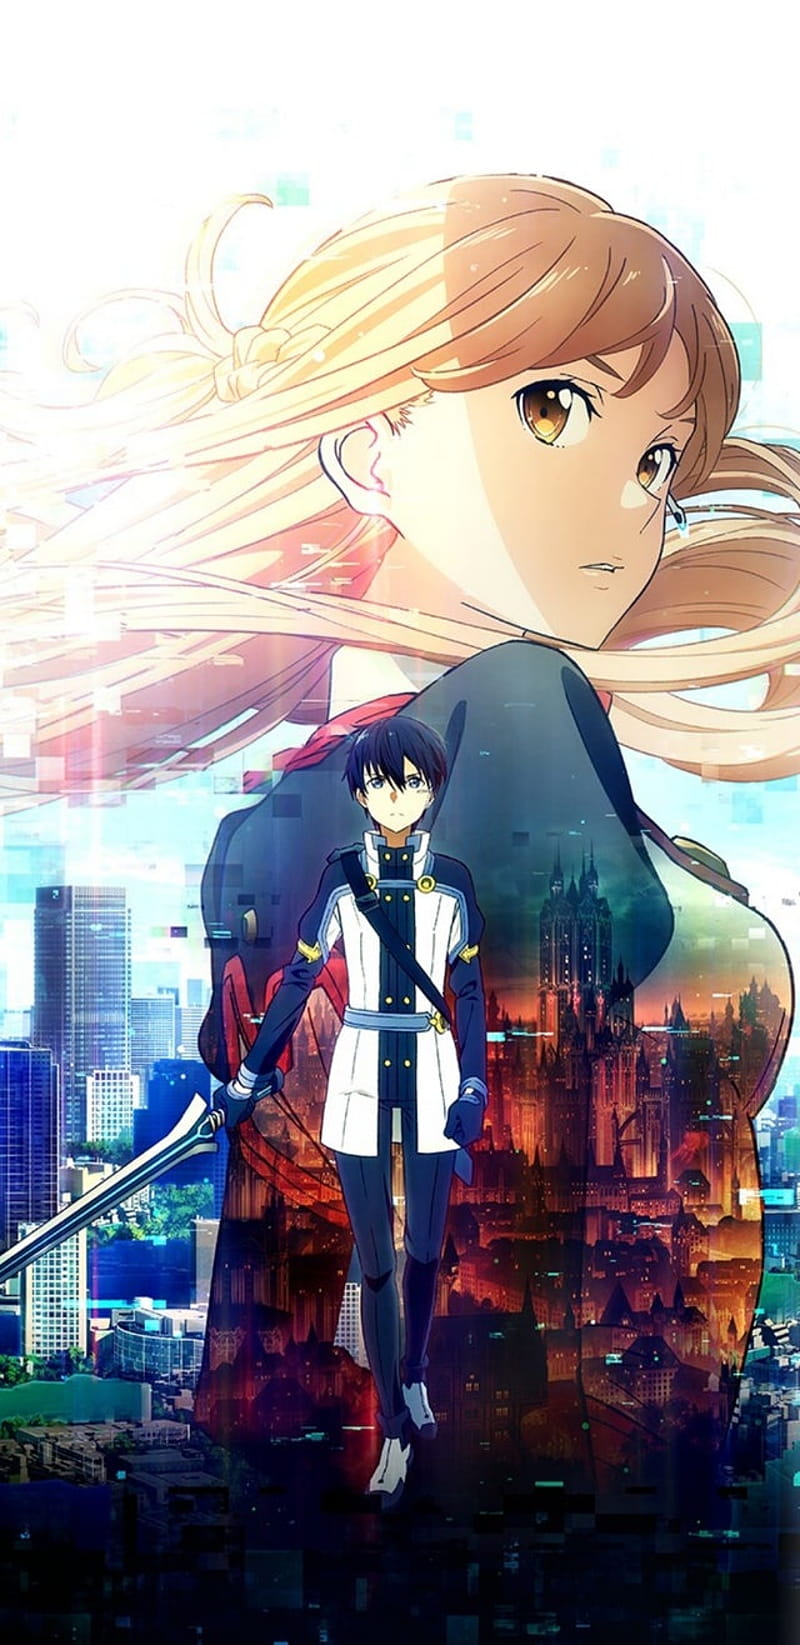 IPhone for light novels of SAOP Vol 1, 2, 3, 4, 5, 7, and Movie visual. SAO Vol 2, 6, 7, 9, 13, 14, 17, 21, 22, and 25 + Ordinal Scale Movie Visual. Need textless covers of SAOP VOL 6 and SAO Vol 1, 2, 4, 5, 8, 10, 11, 12, 15, 16, 18, 19, Kirito Sword Art Online, HD phone wallpaper